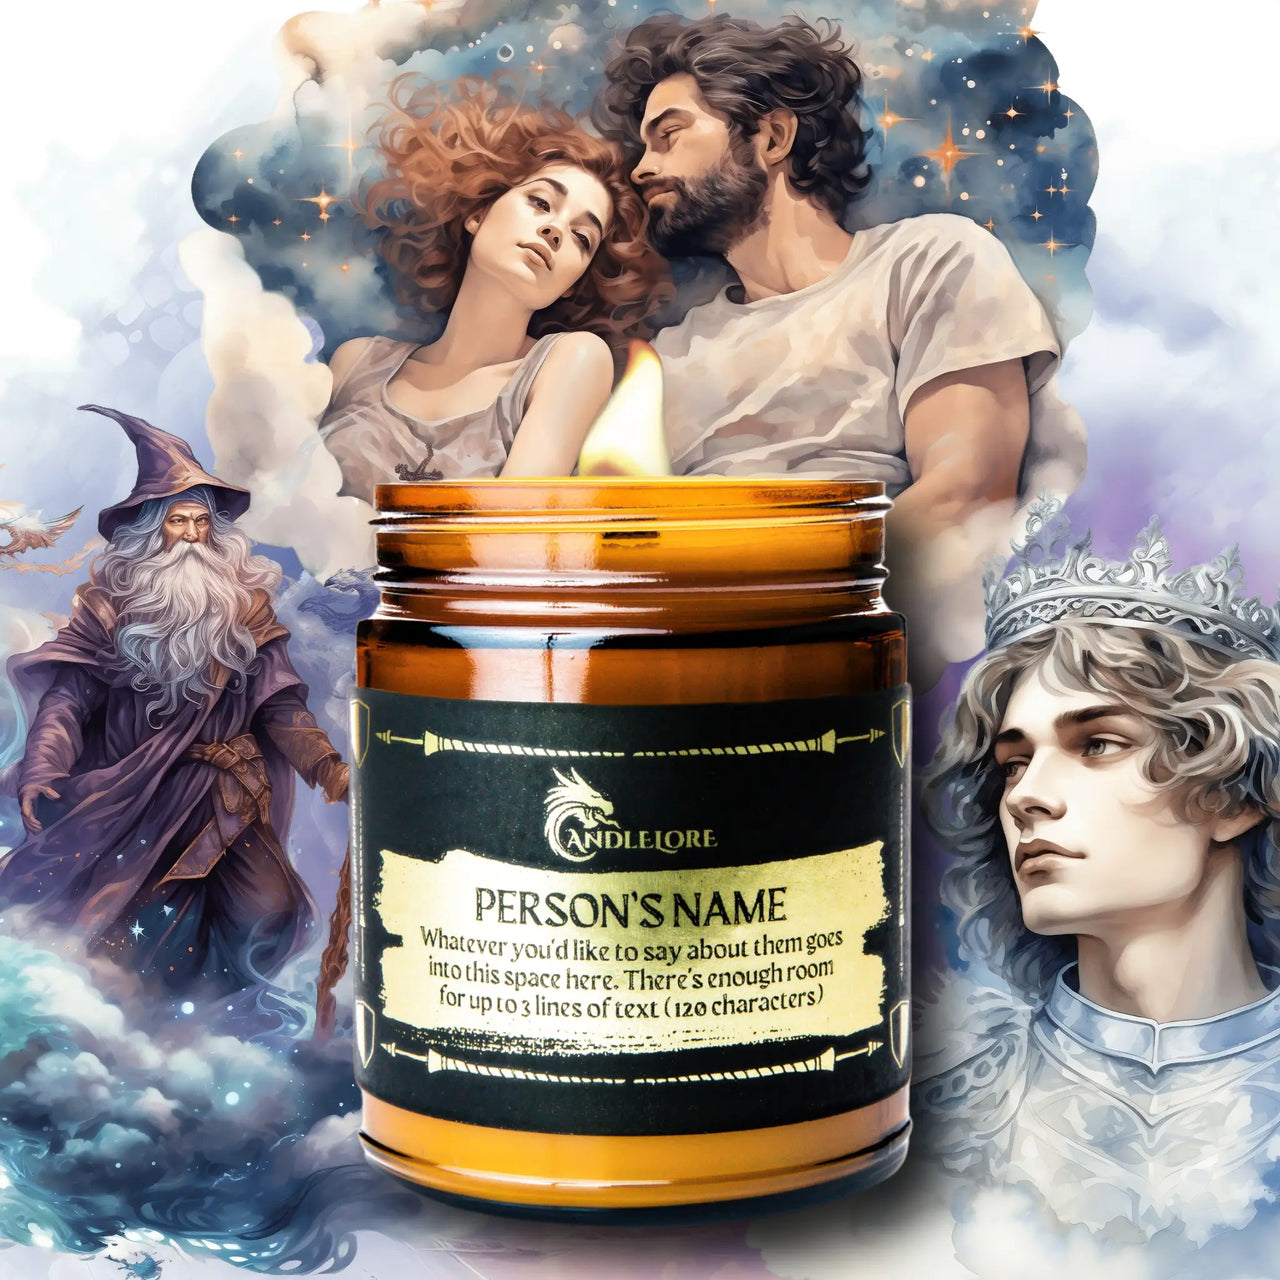 customizable fantasy candle with fantasy images around it